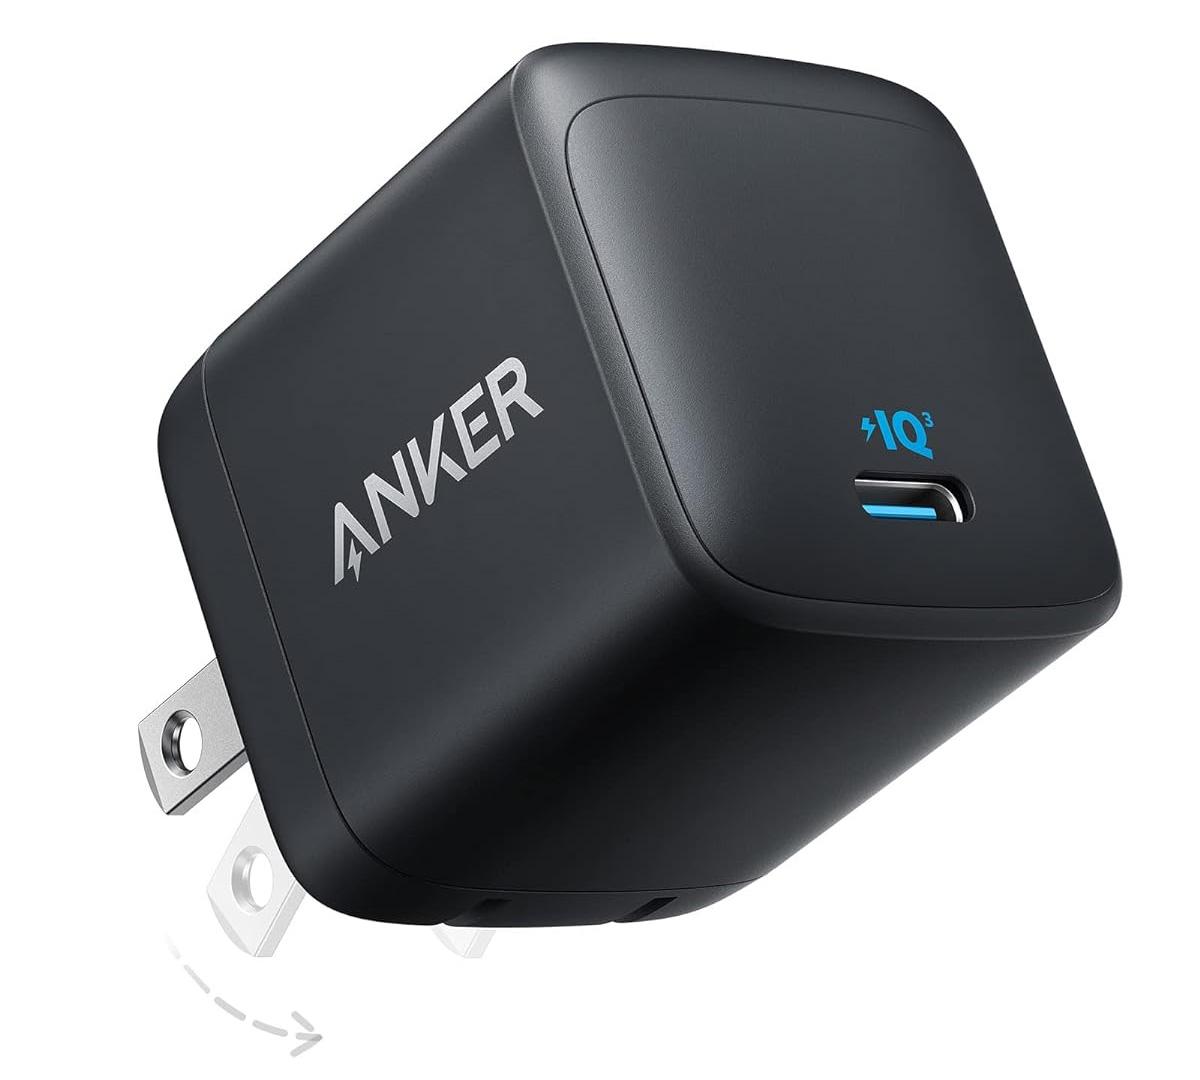 Anker 313  45W USB-C Super Fast Charger for $17.99